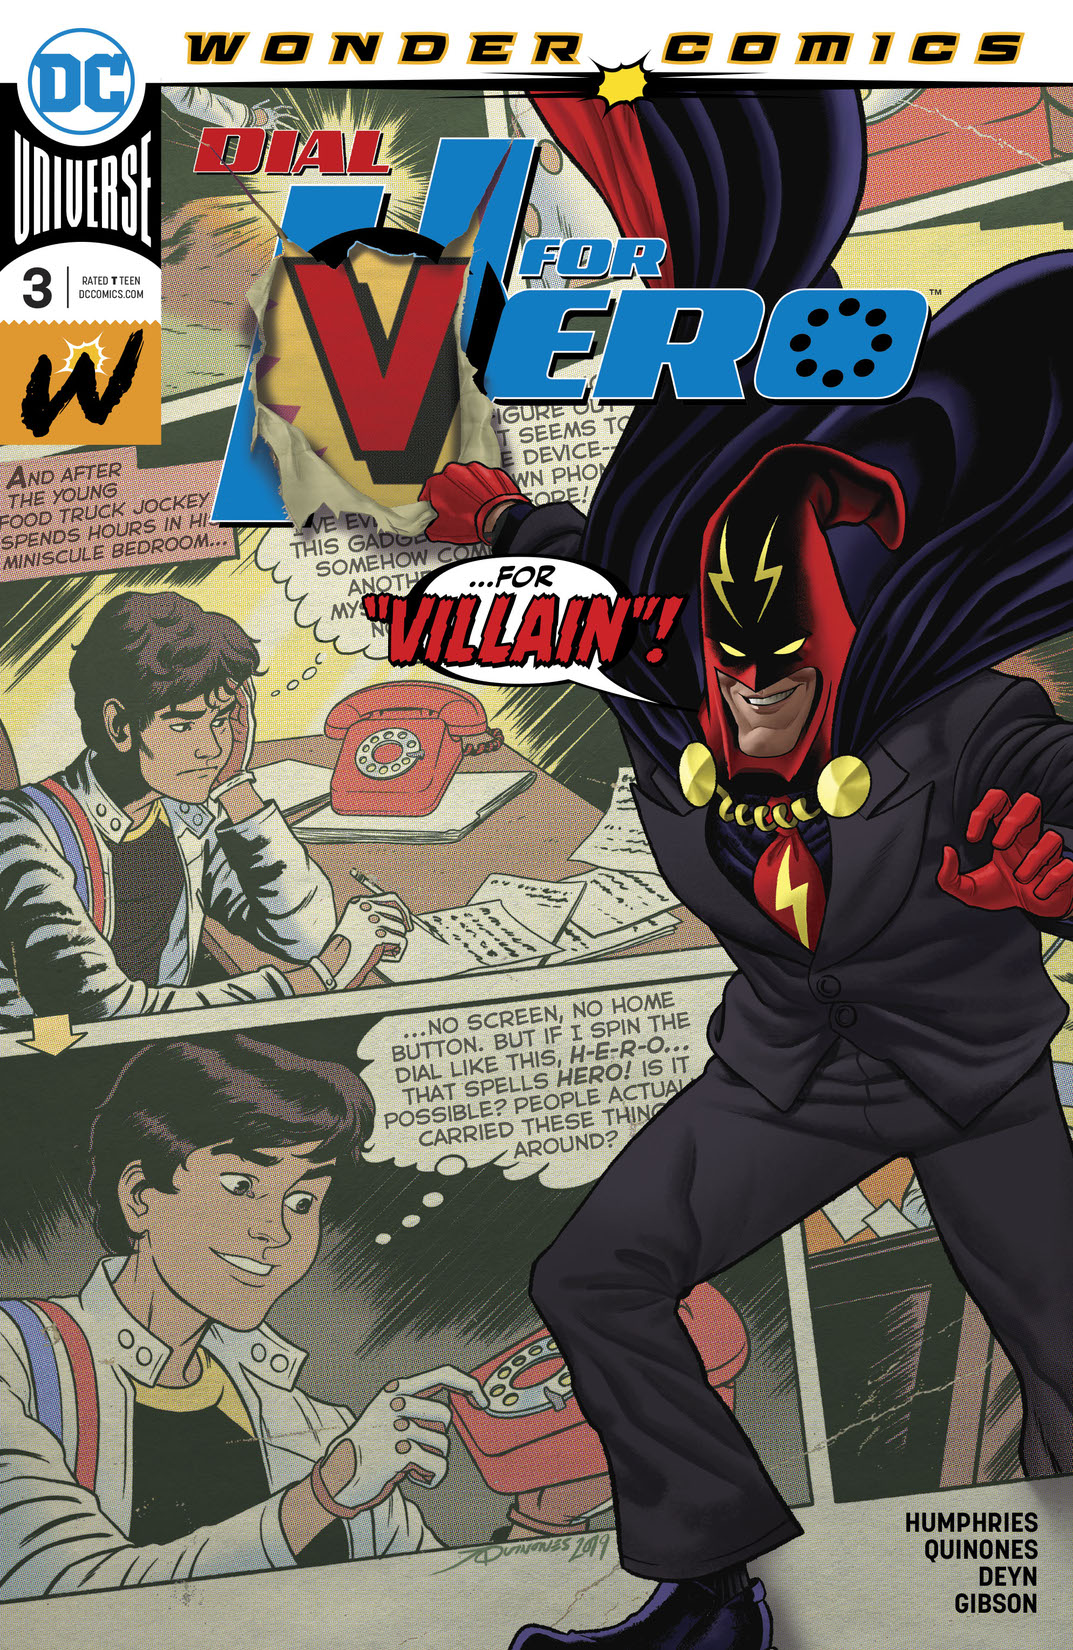 Dial H for Hero (2019-) #3 preview images